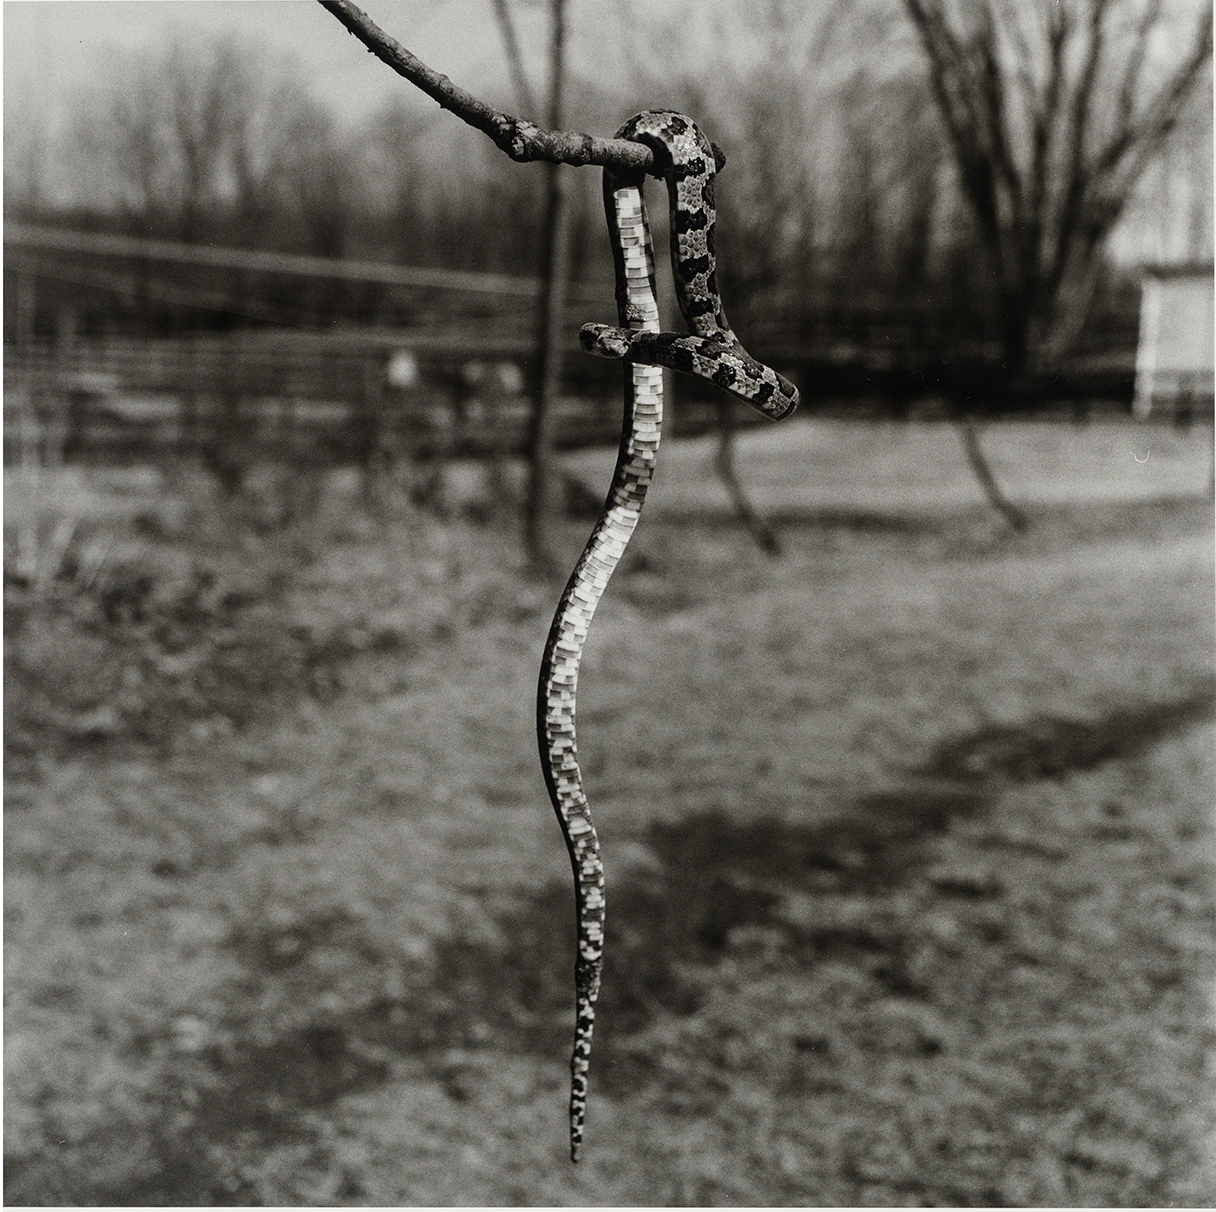 Snake on a Branch, Germantown, New York